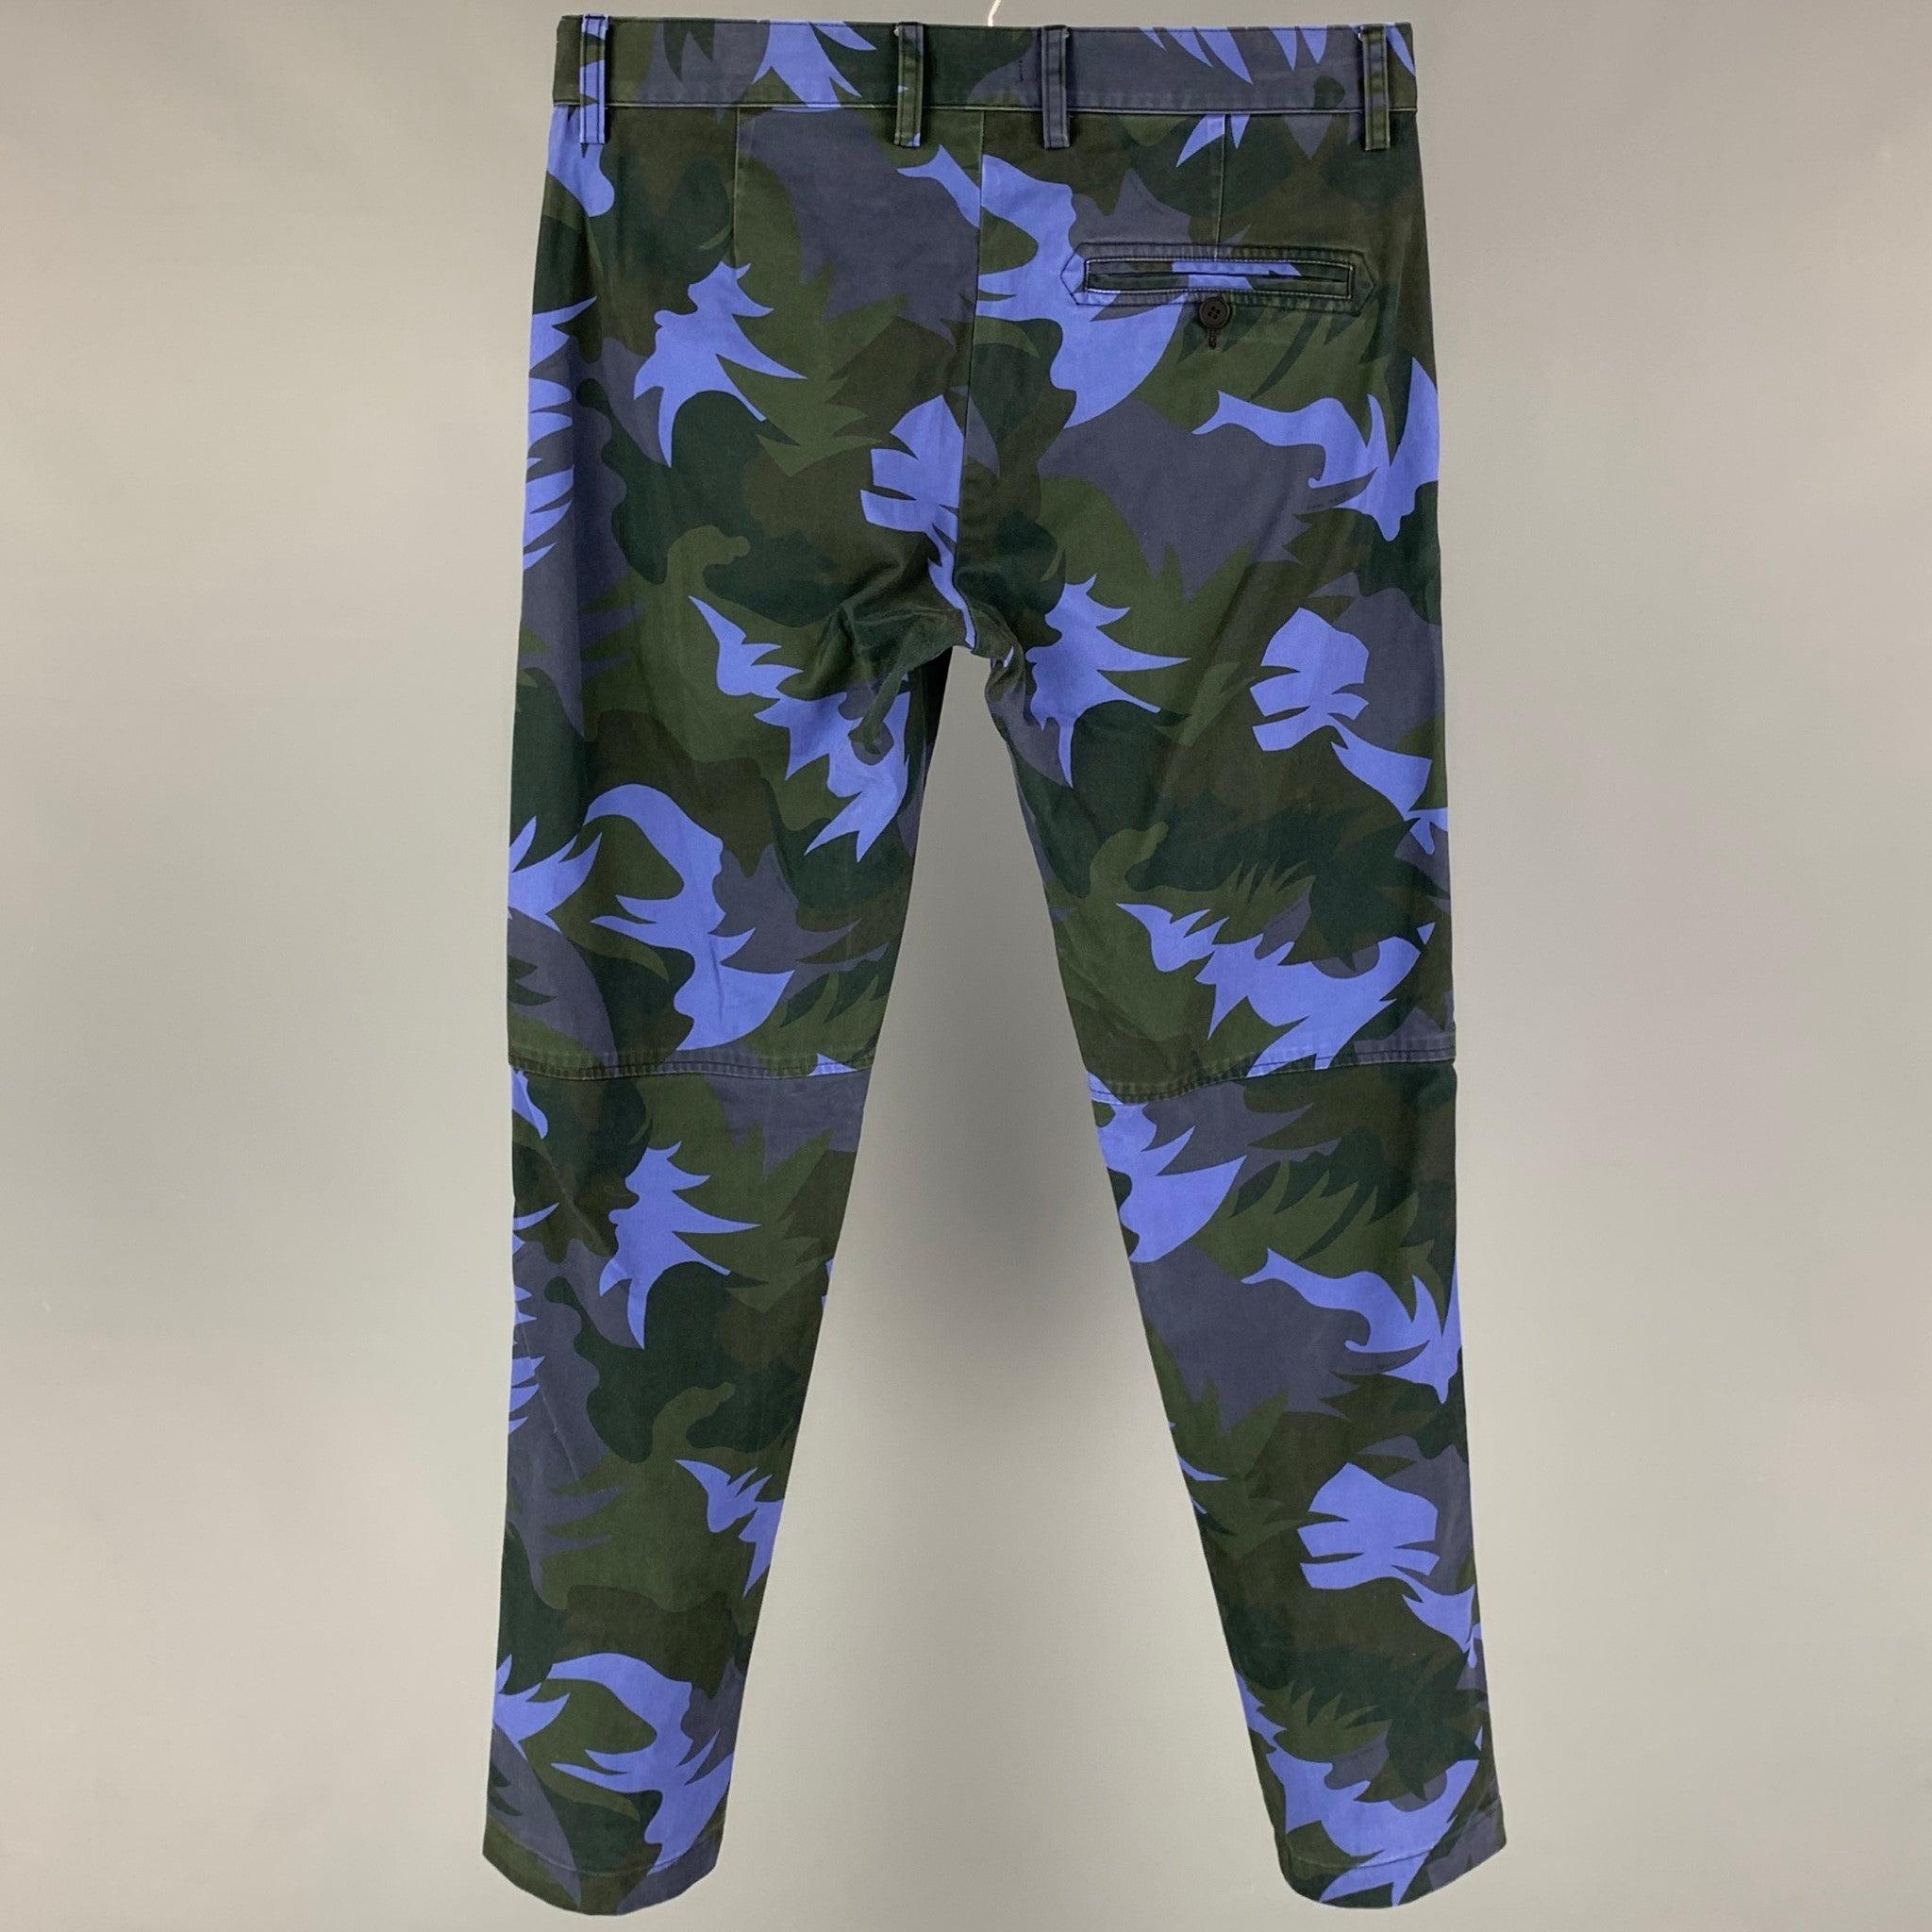 TOMAS MAIER 2018 pants comes in a blue & gray leaf print cotton featuring a slim fit, pocket details, and a zip fly closure.
Very Good
Pre-Owned Condition. 

Marked:   31 

Measurements: 
  Waist: 30 inches  Rise: 10 inches  Inseam: 30 inches 
  
 